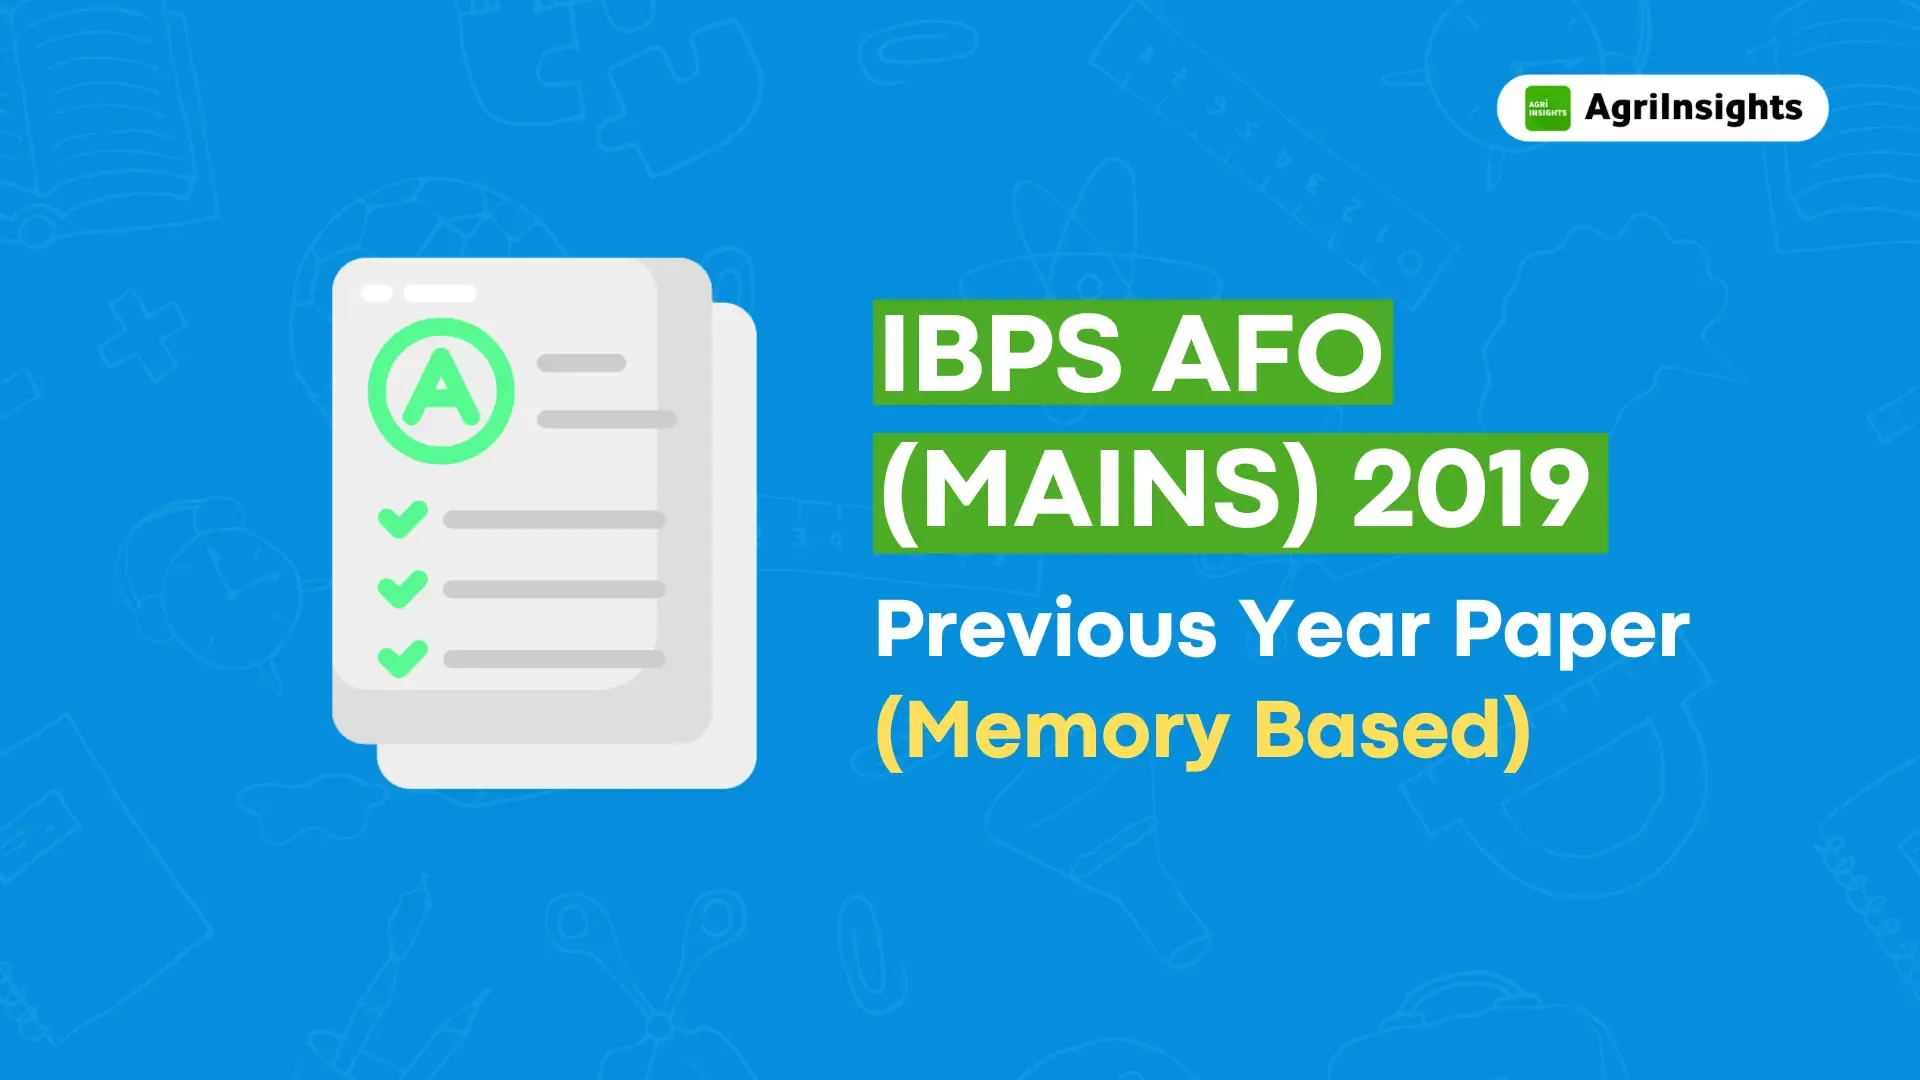 IBPS AFO Mains 2019 Solved Previous Year Paper